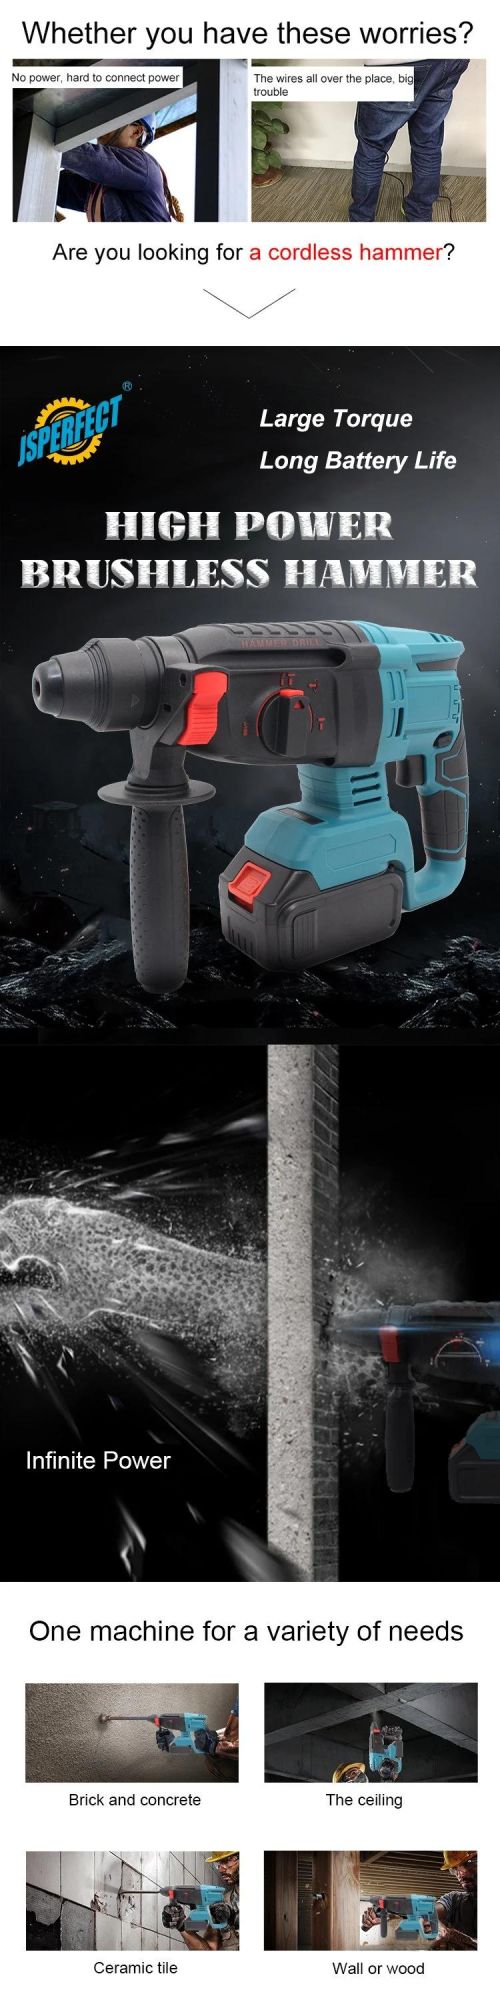 Wholesale High Quality Lithium Battery Bit Set Drill Hammer Cordless